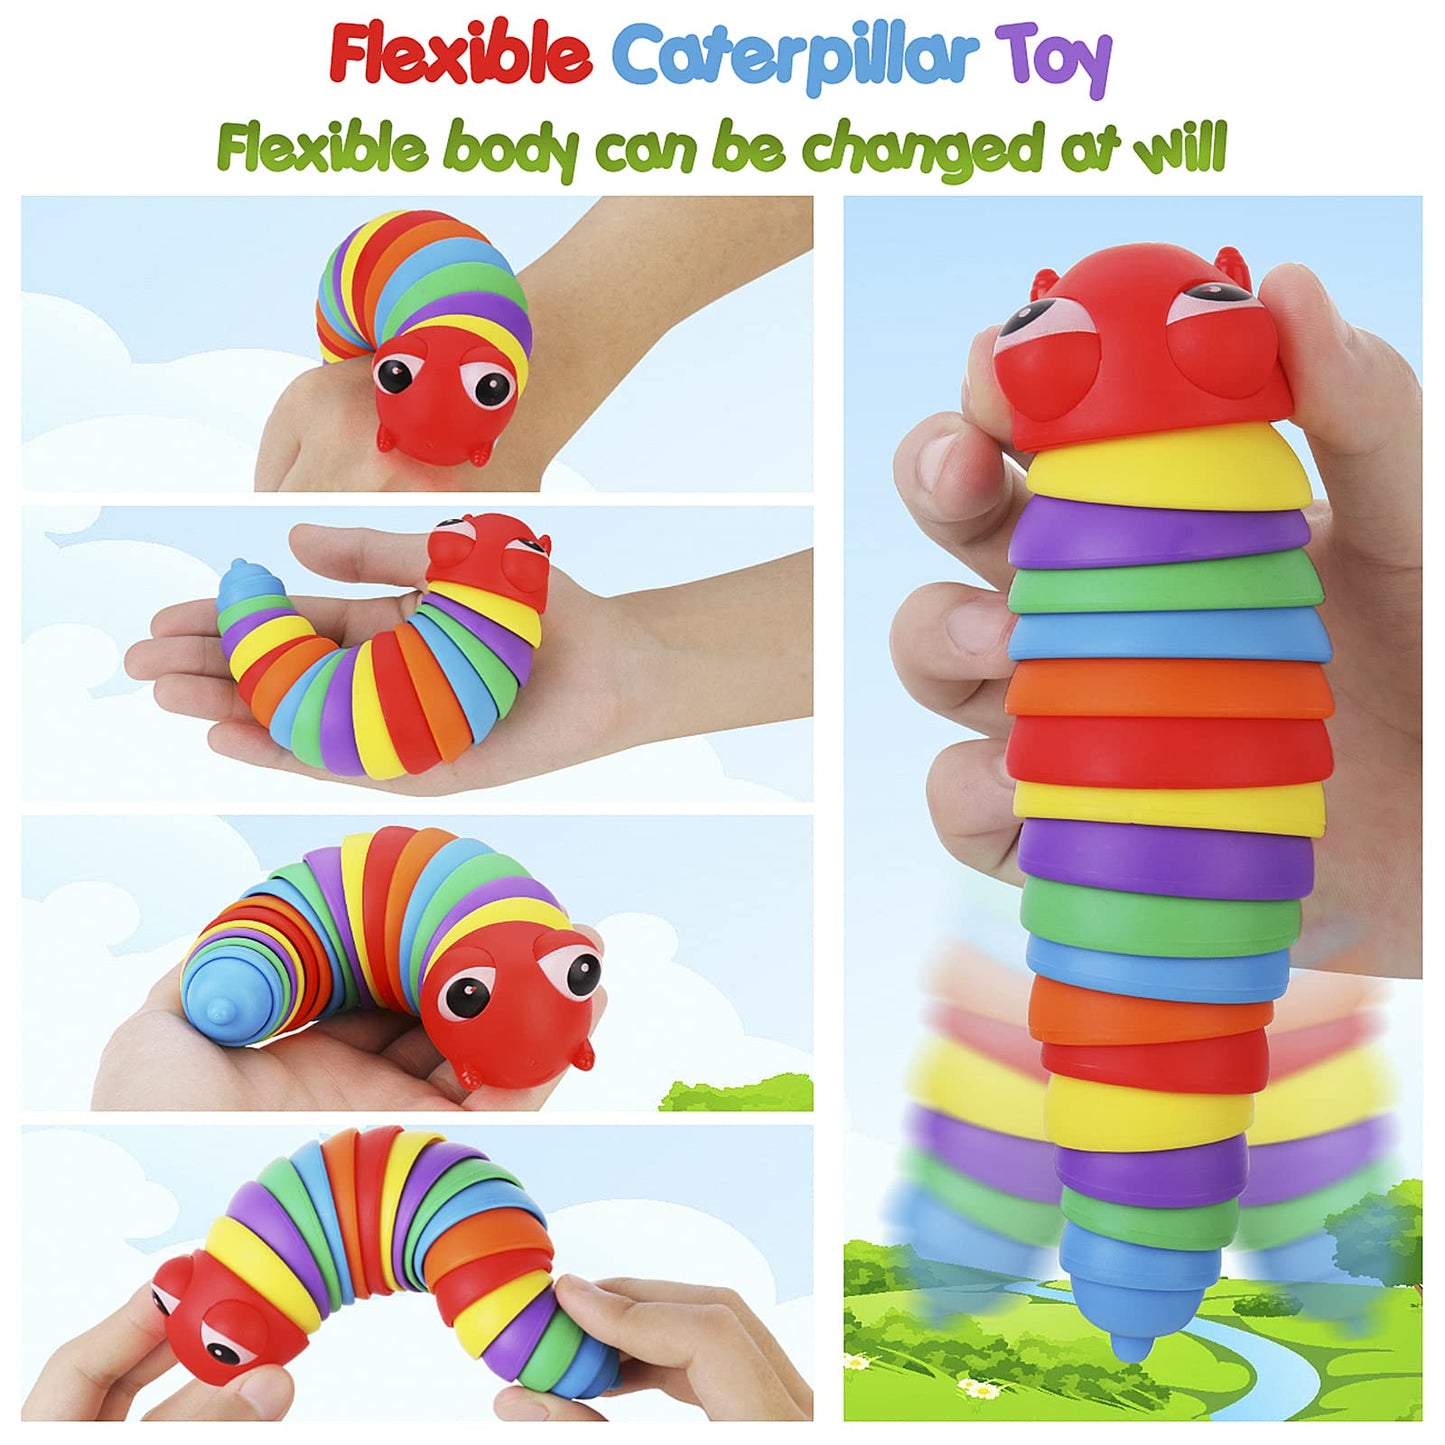 ChicJoy Caterpillar Sensory Toys for Toddlers, Road Trip Autism Fidget Toys for Autistic Kids,Party Favor Desk Pet Gifts for Children, Adults, Christmas, Birthday- Red